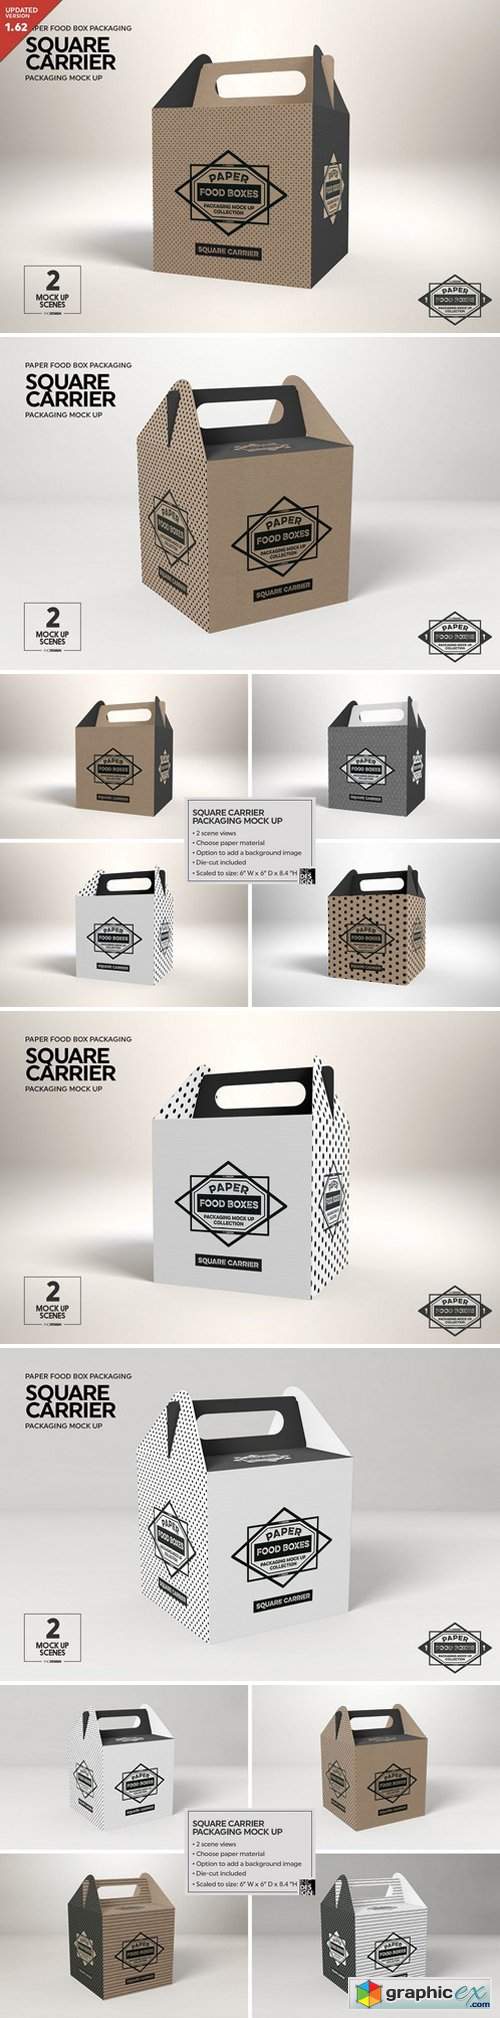 Square Carrier Packaging Mockup